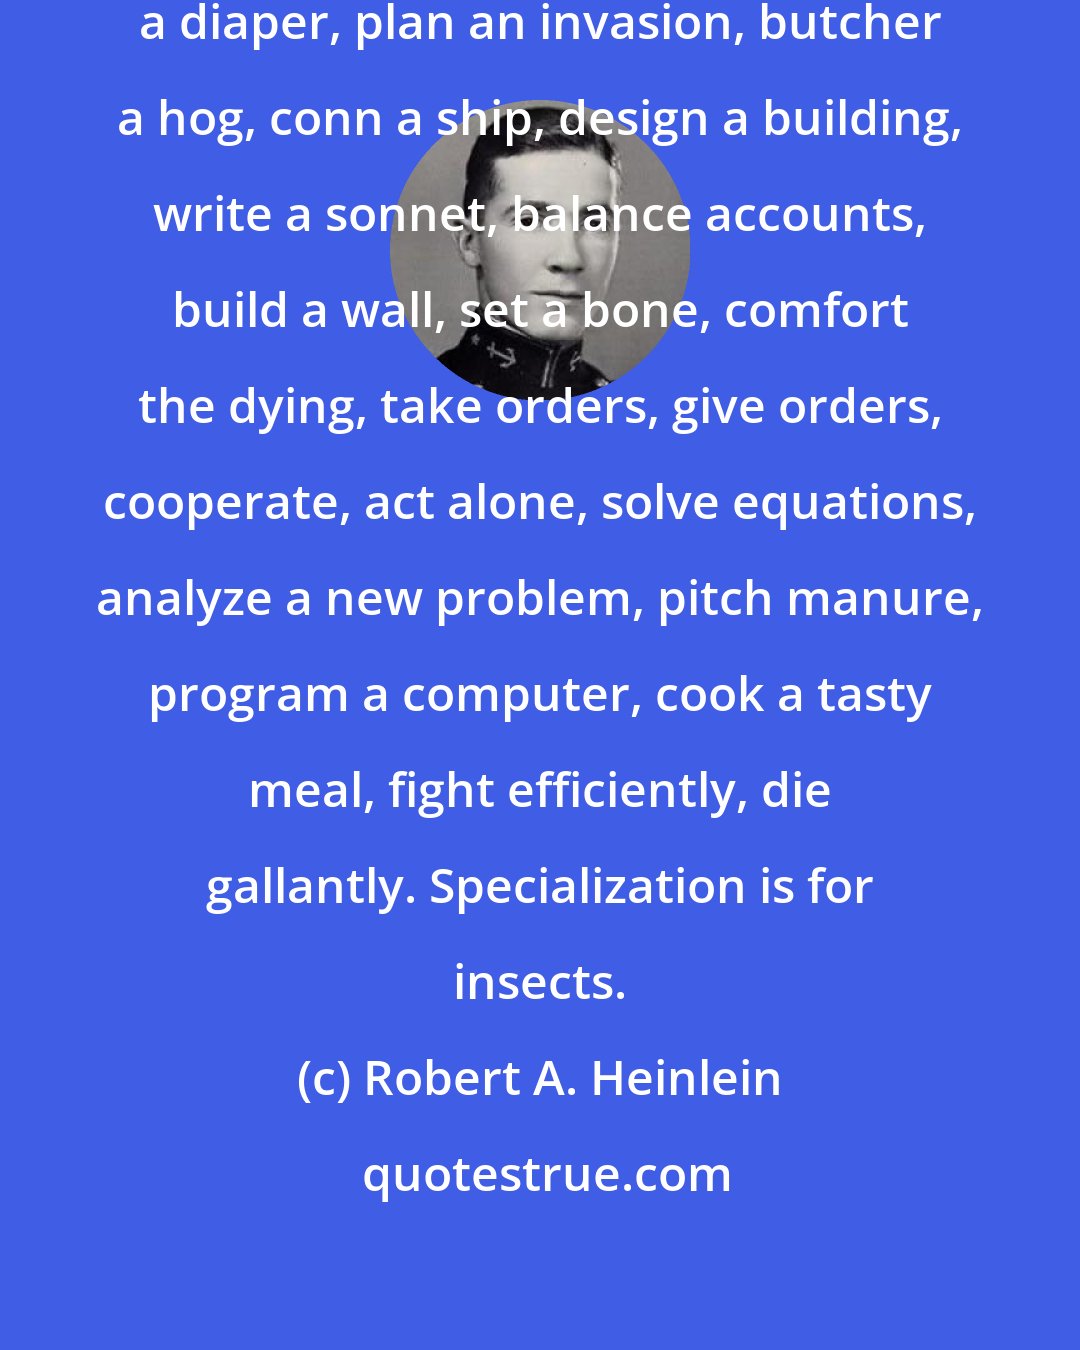 Robert A. Heinlein: A human being should be able to change a diaper, plan an invasion, butcher a hog, conn a ship, design a building, write a sonnet, balance accounts, build a wall, set a bone, comfort the dying, take orders, give orders, cooperate, act alone, solve equations, analyze a new problem, pitch manure, program a computer, cook a tasty meal, fight efficiently, die gallantly. Specialization is for insects.